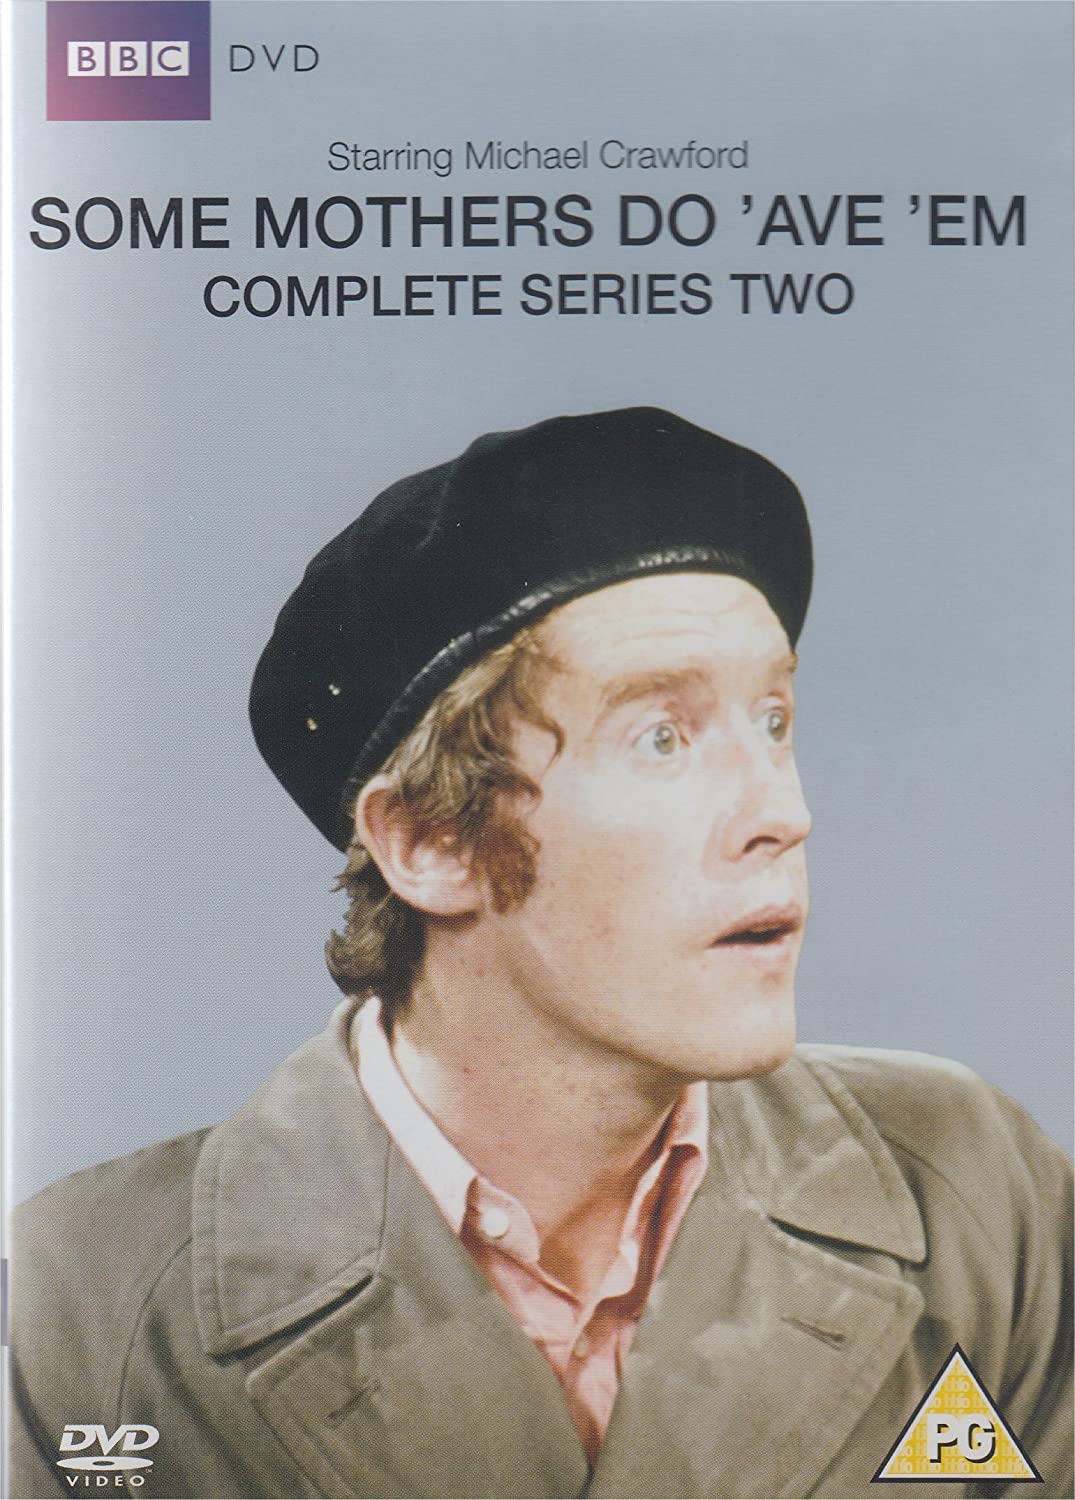 Some Mothers Do 'ave 'em - Complete Series 2 (BBC) [DVD]